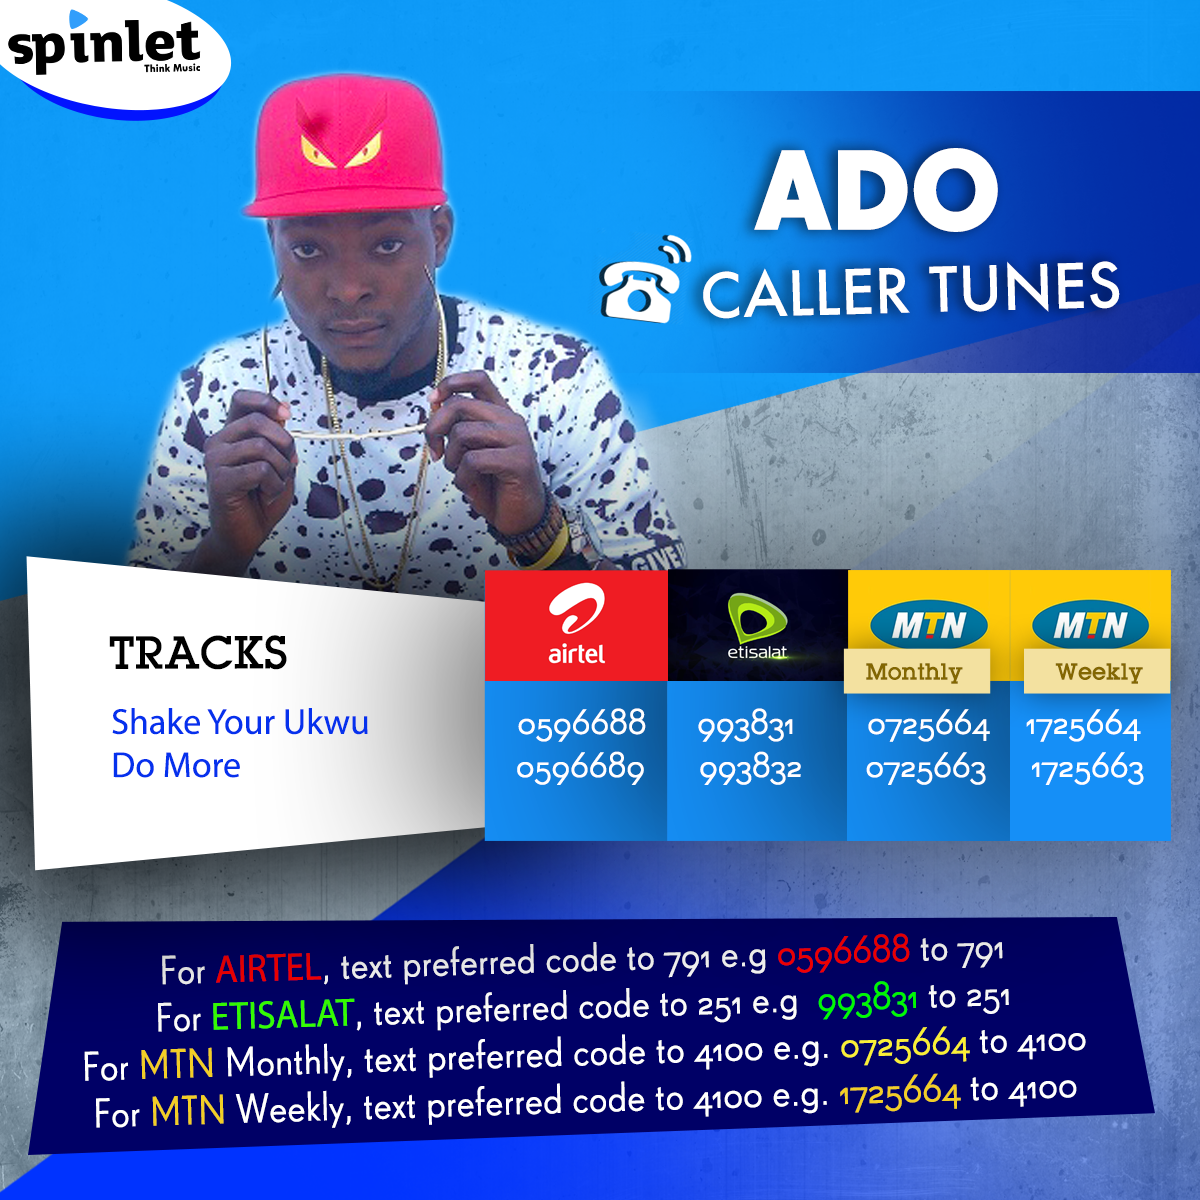 Get the tunes from Spinlet By @IamAdoOfficial